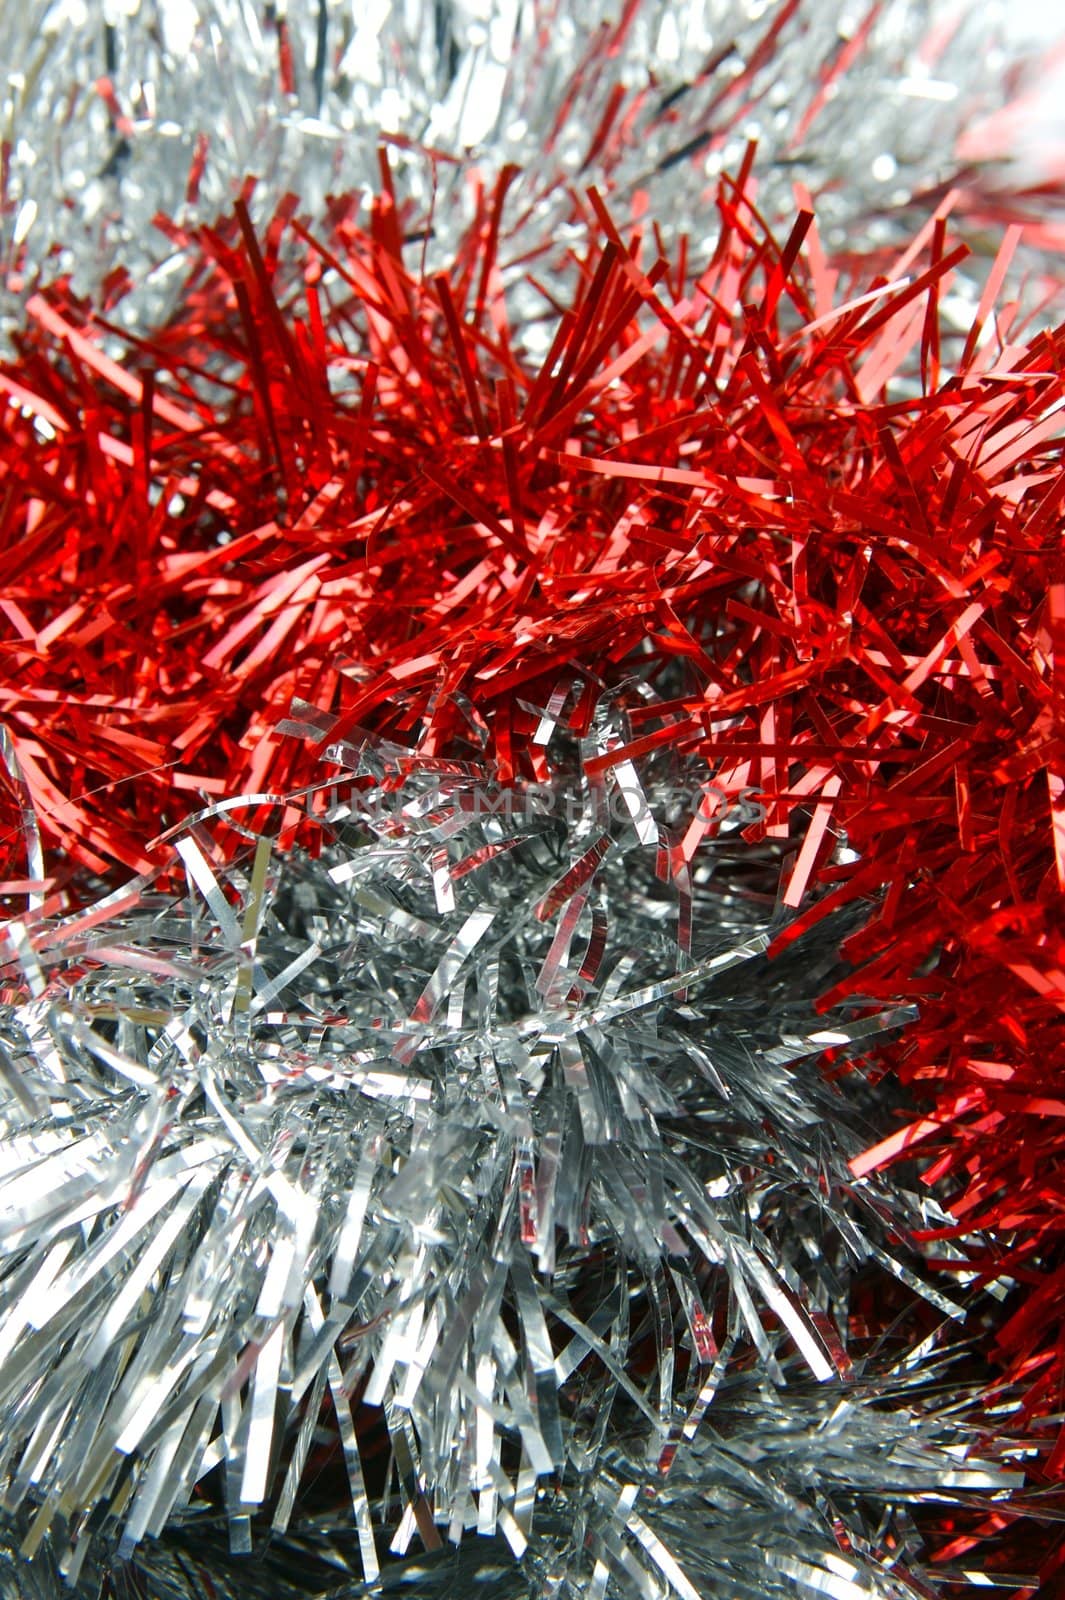 Christmas ornaments isolated on a tinsel